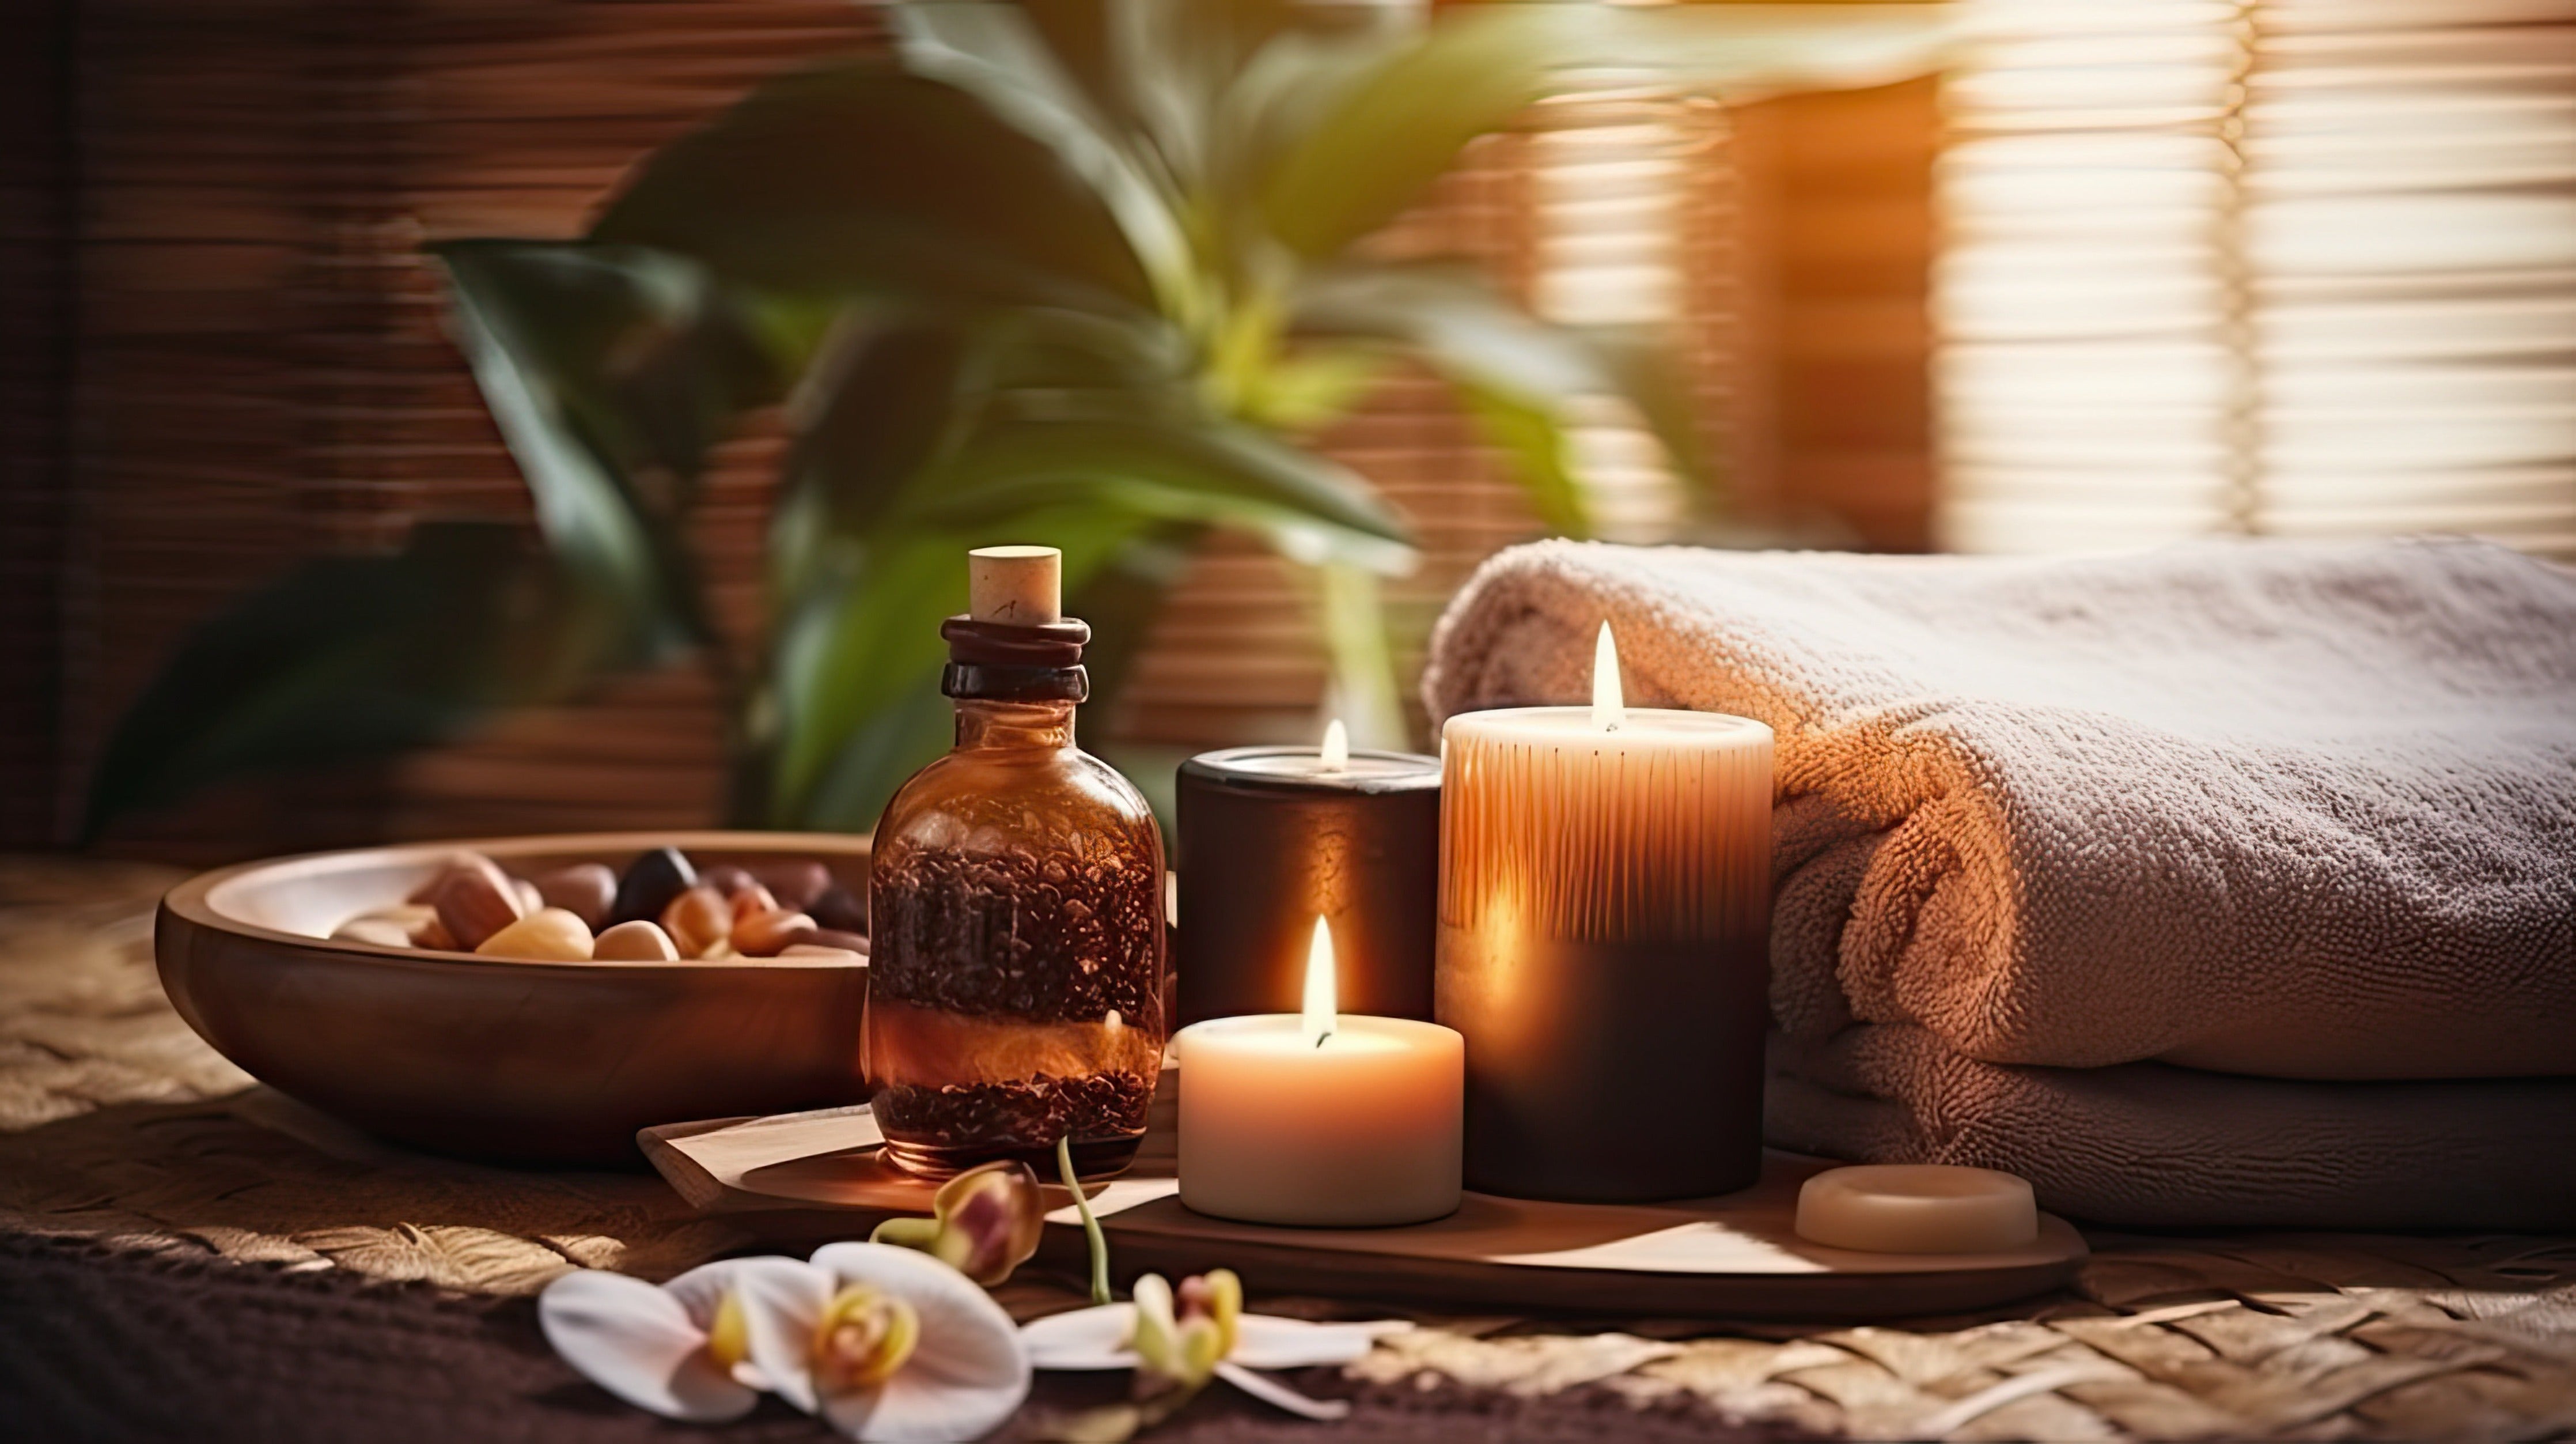 How To Have The Perfect Pamper Evening At Home